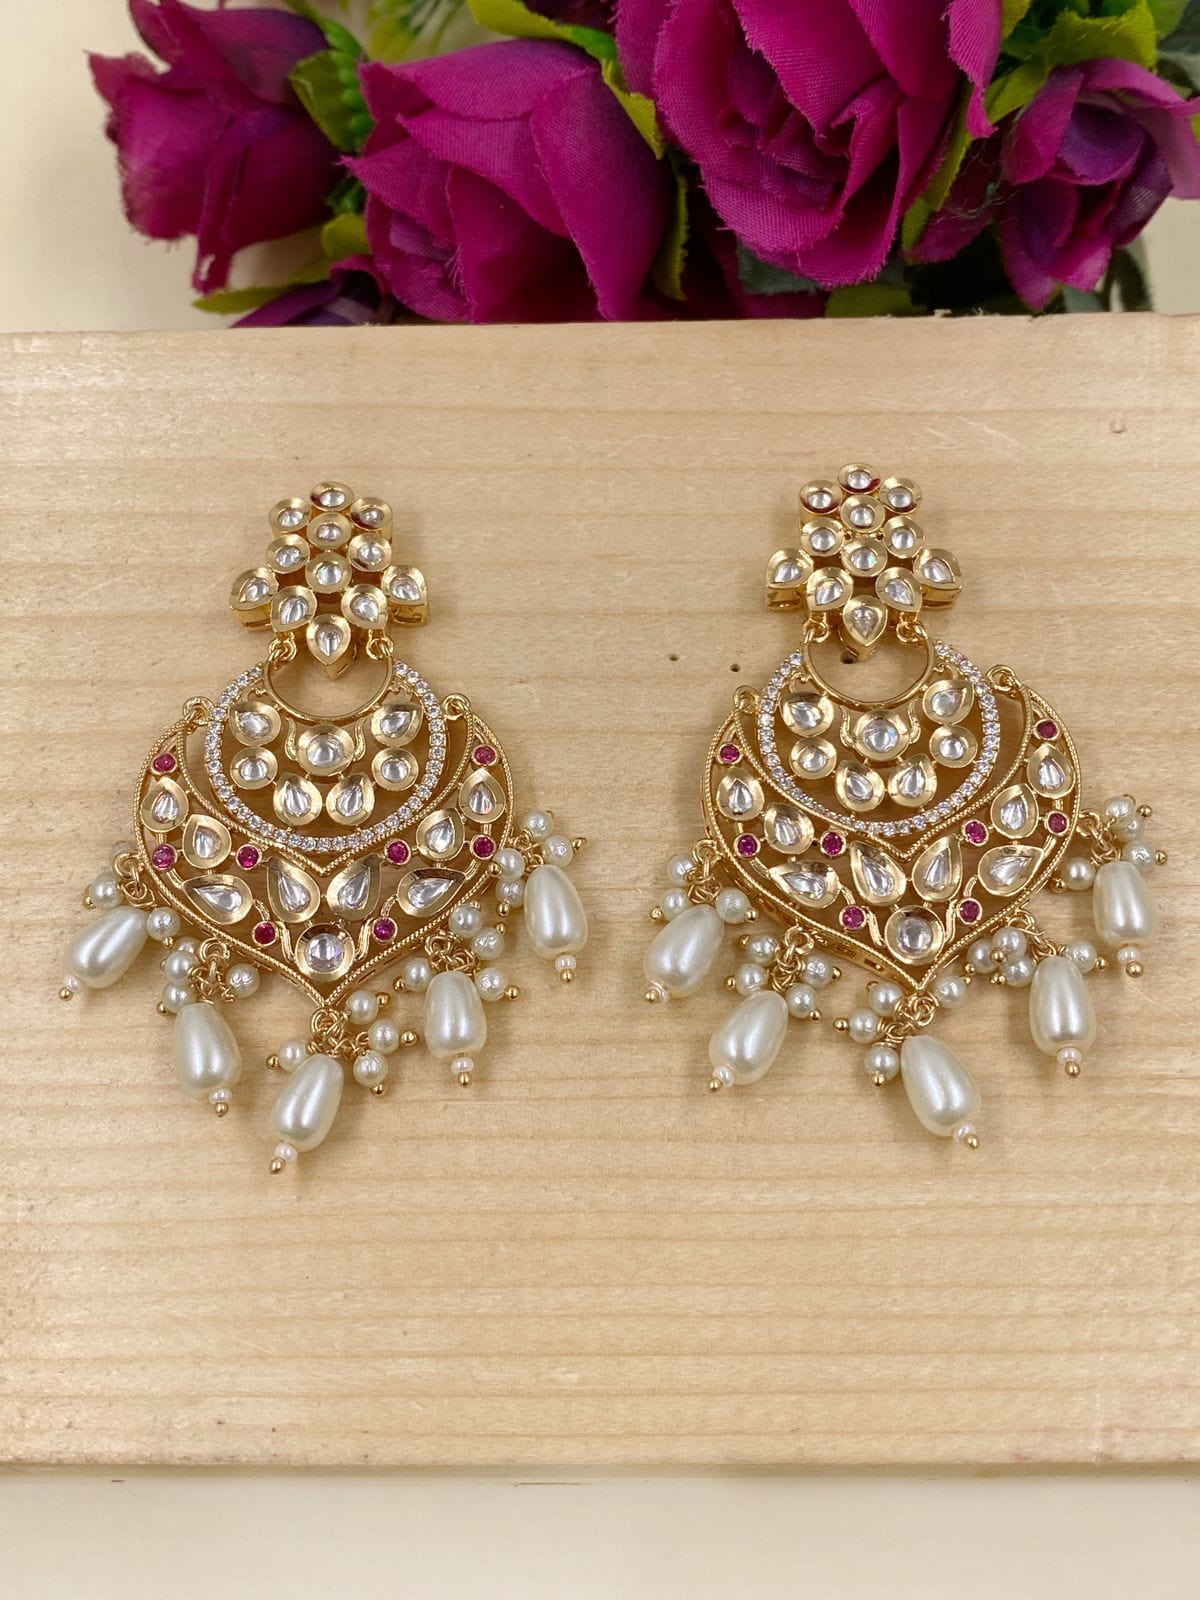 Buy Alex Jewellery AD-Kundan Earrings Online at Low Prices in India |  Amazon Jewellery Store - Amazon.in